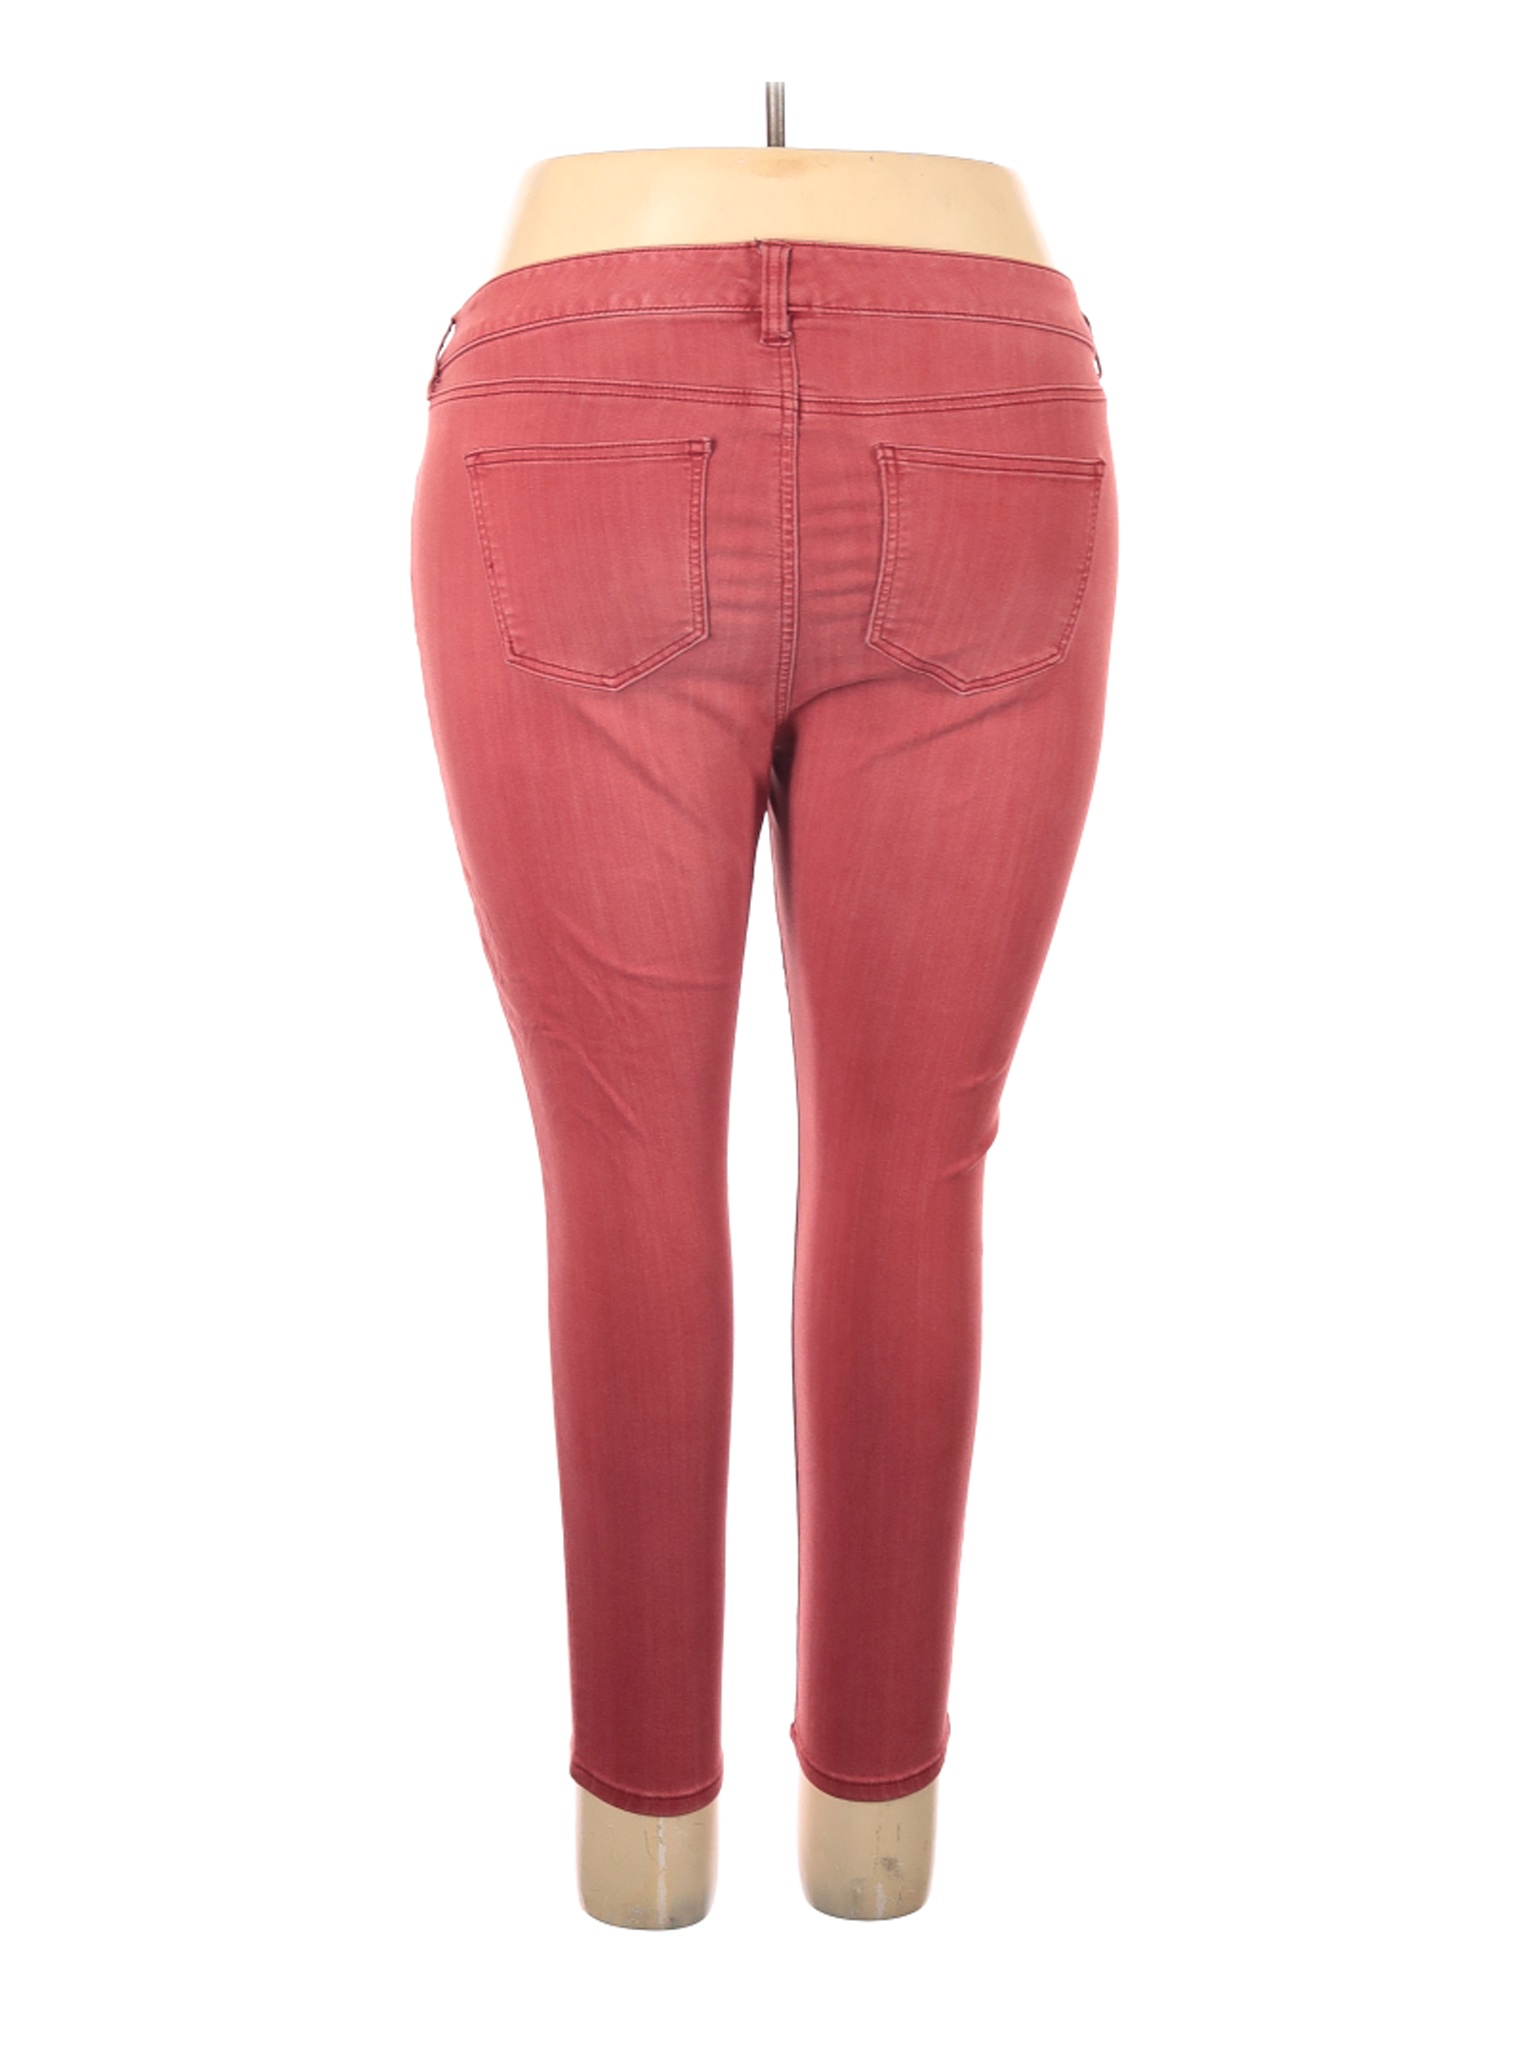 molly and isadora plus size jeans